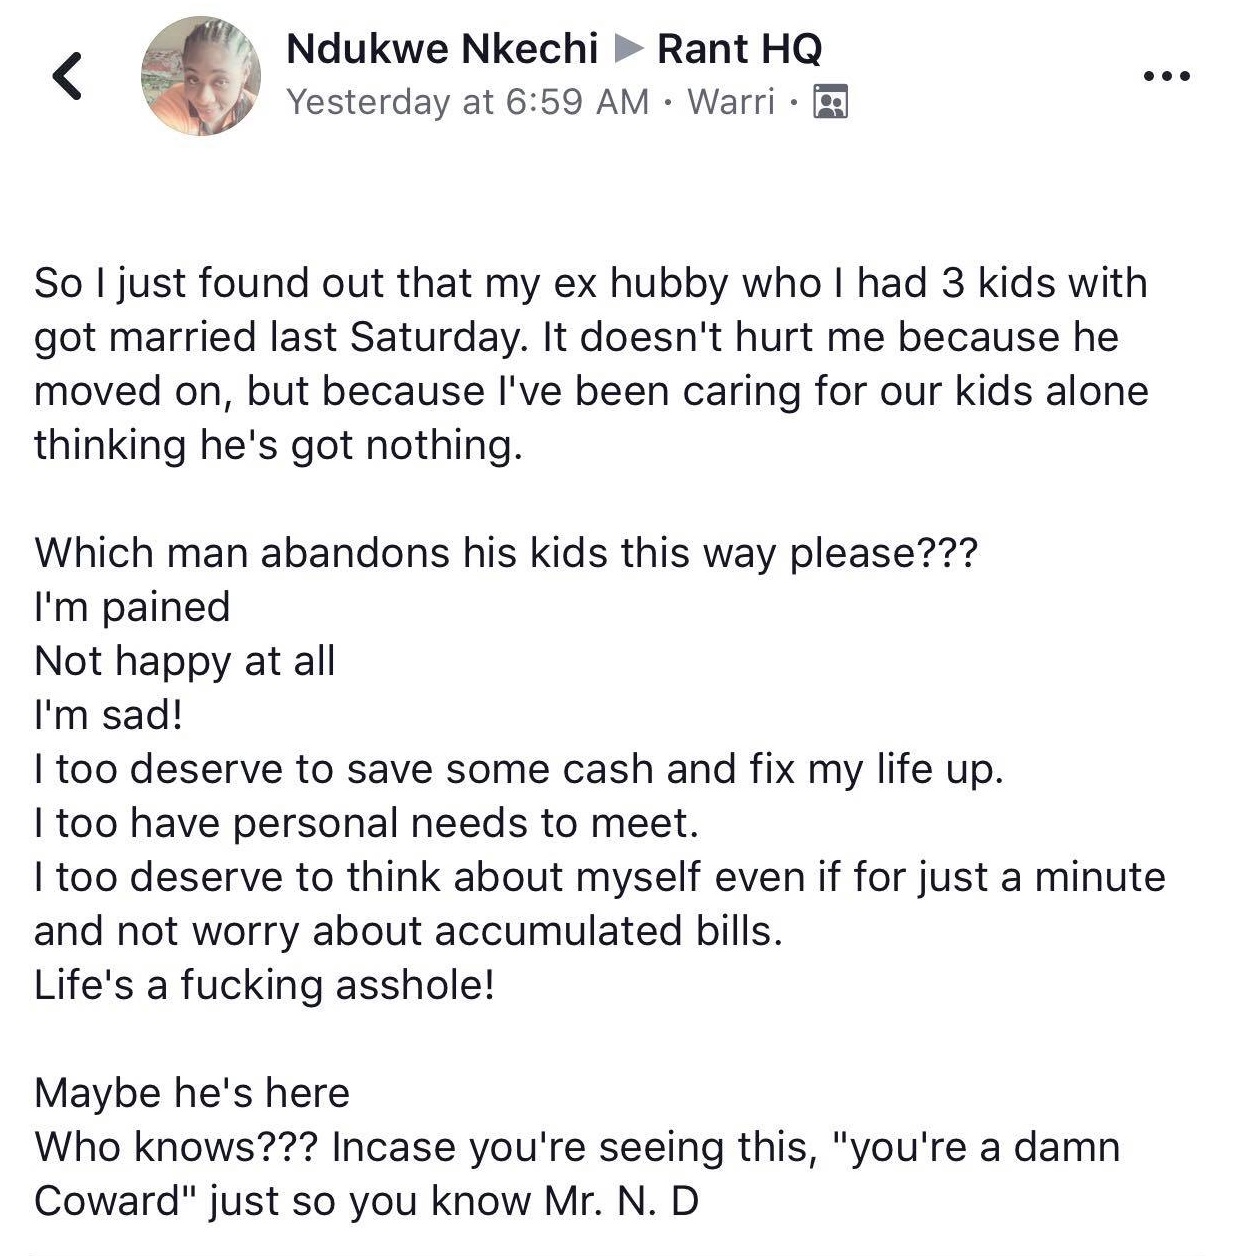 Nigerian mother of three calls out her ex-husband who's about to remarry; calls him a coward.